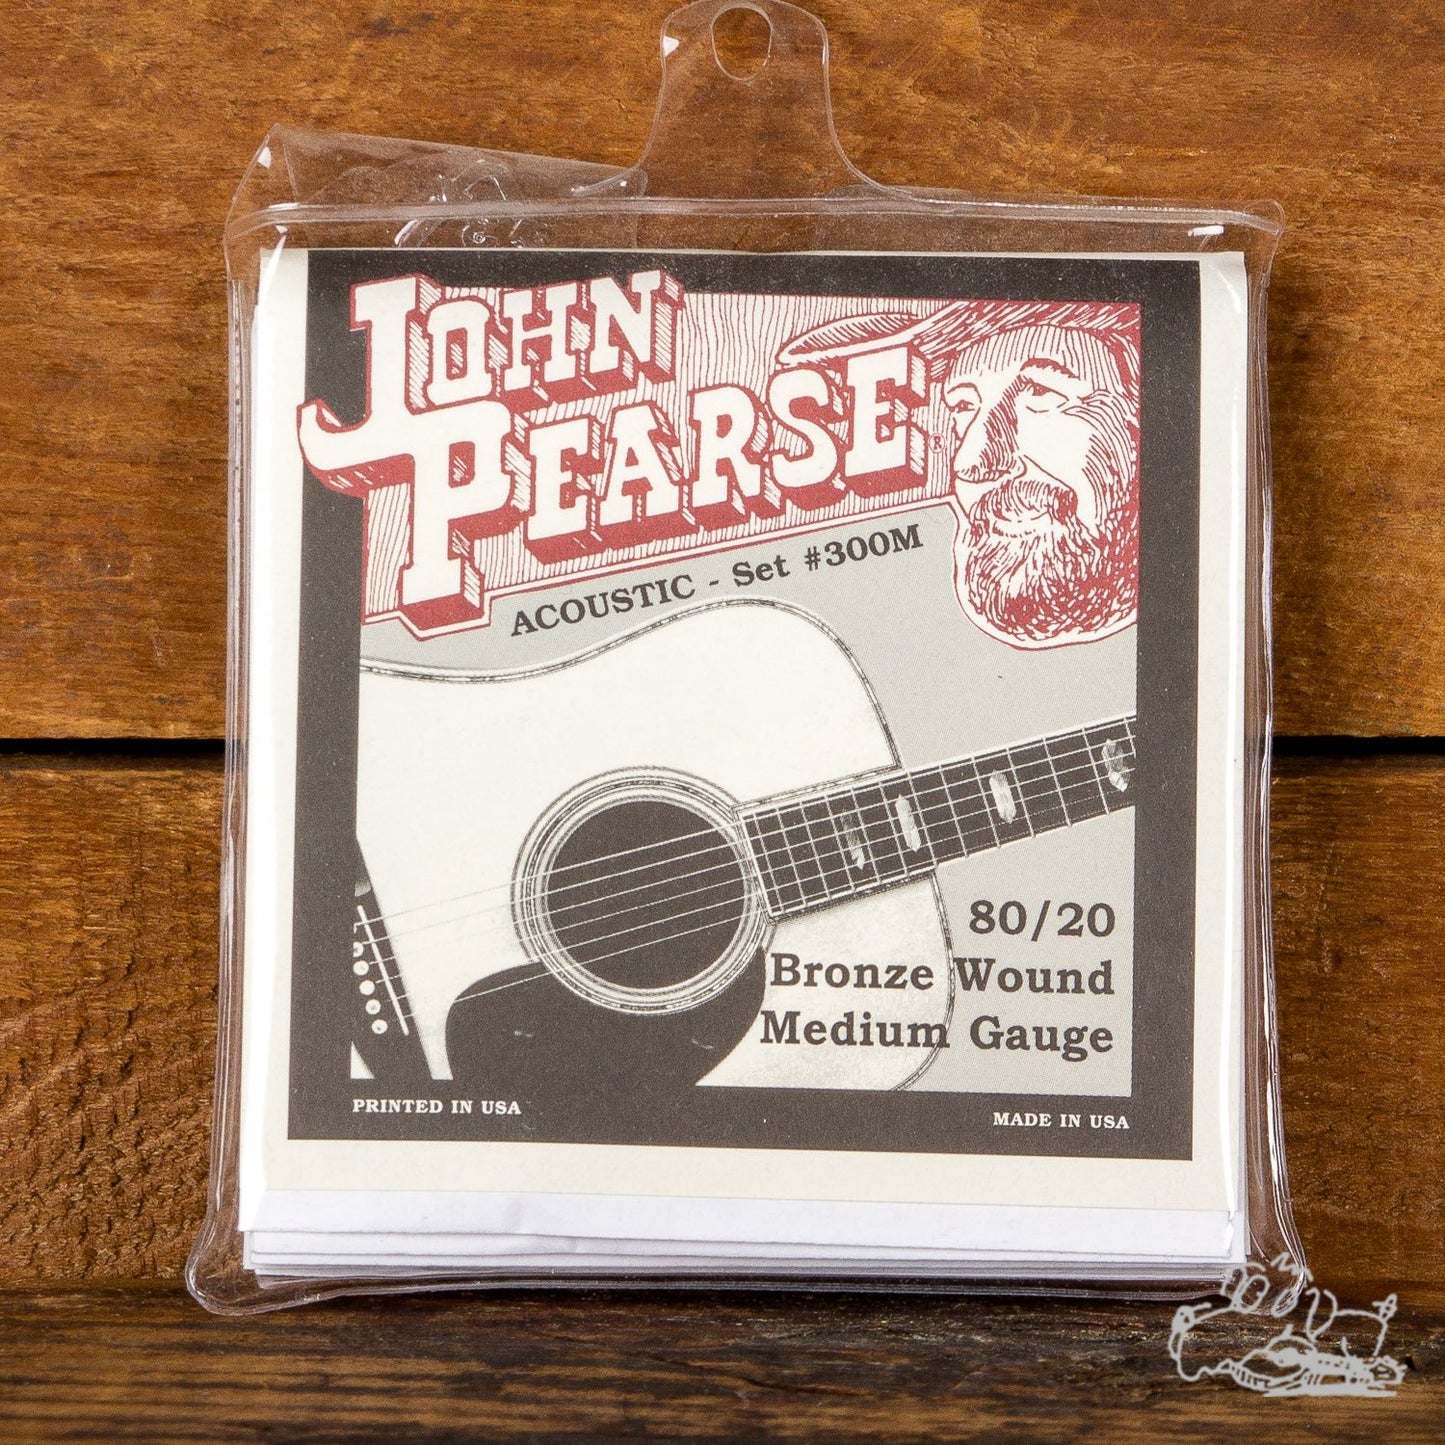 John Pearse 13-56 "New Standard" Bronze Wound 80/20 Acoustic Guitar Strings